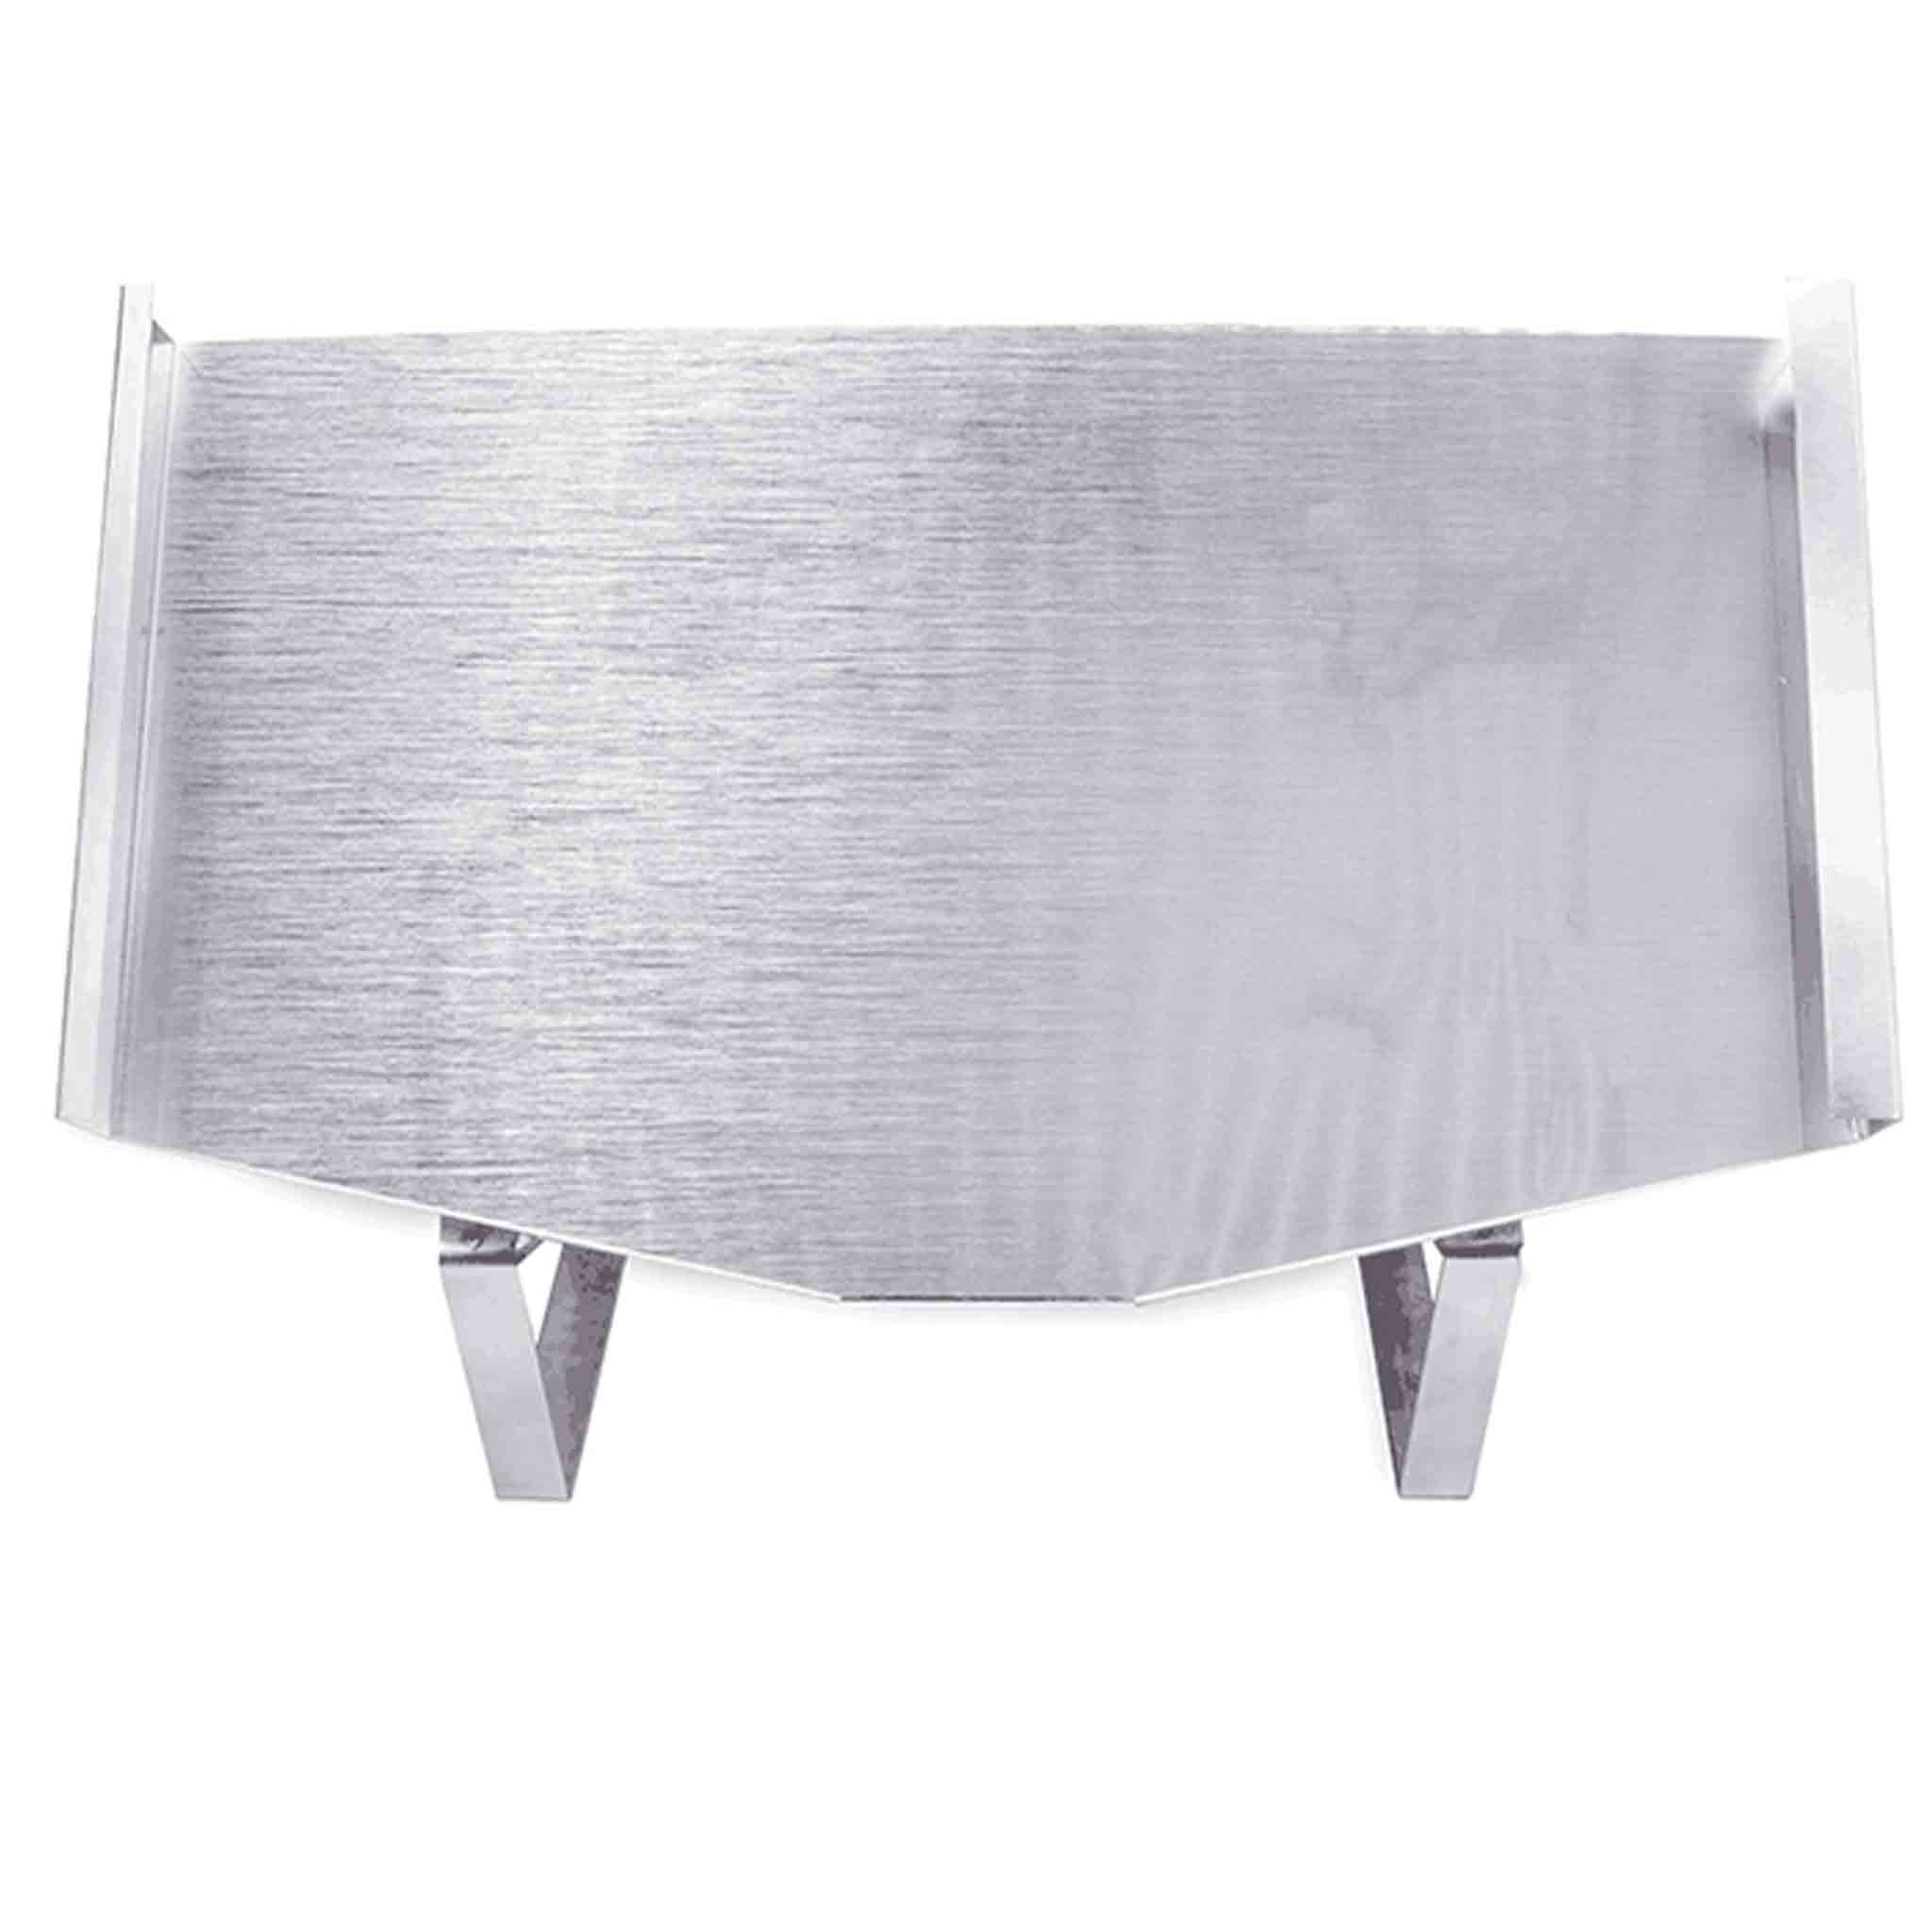 Stainless Steel Honey Comb Display Stand for Restaurants and Cafe's - Display collection by Buzzbee Beekeeping Supplies